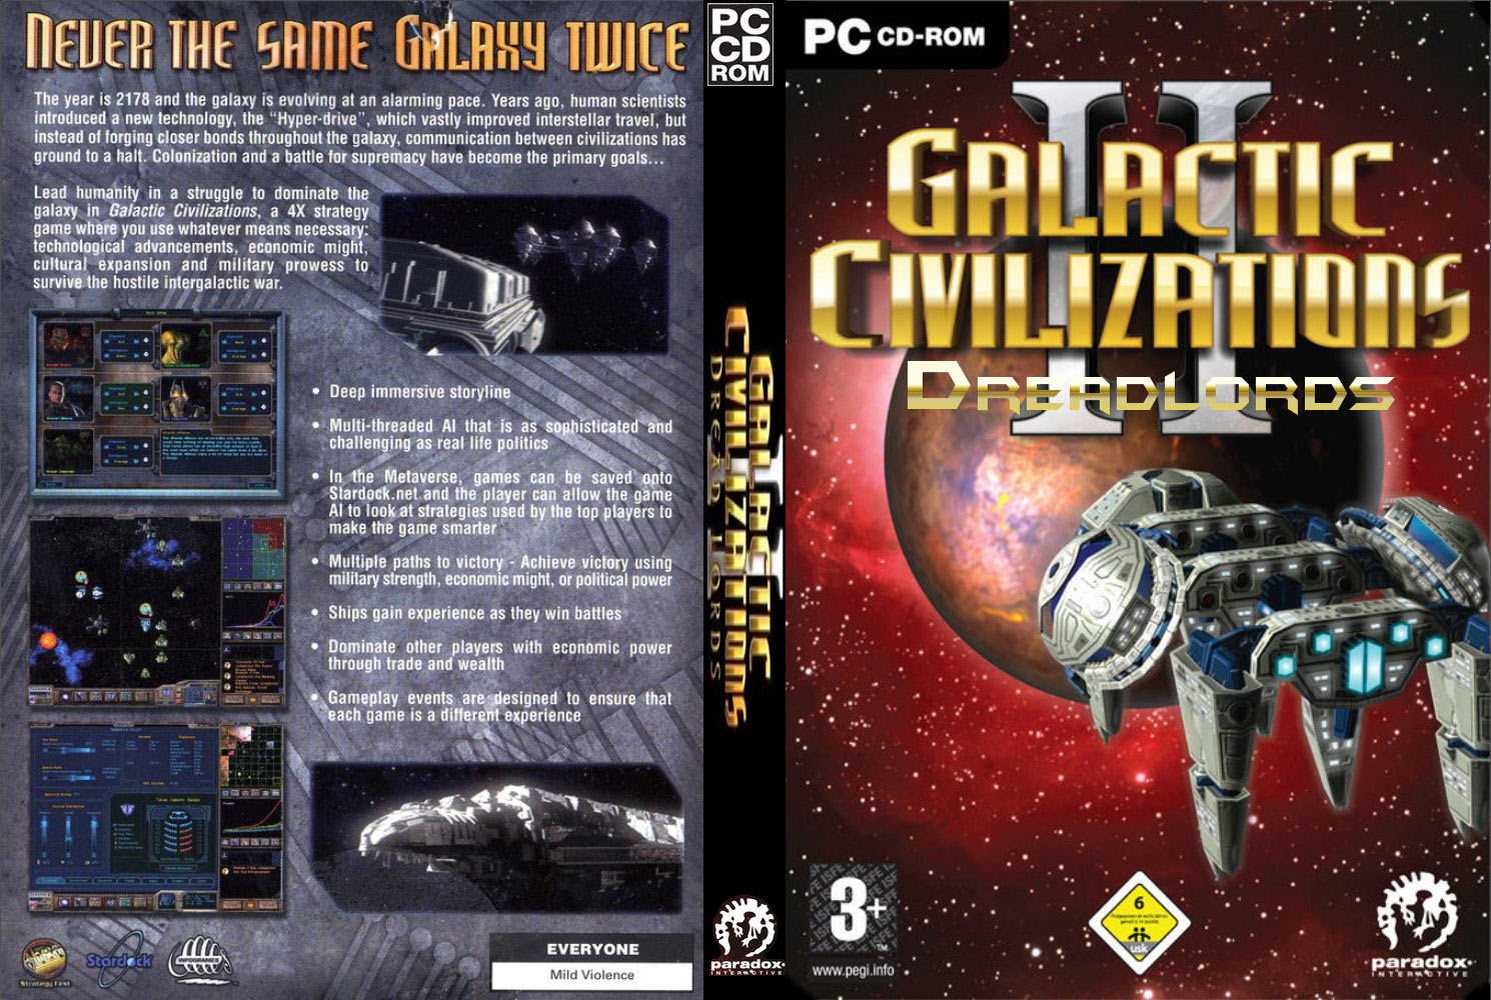 Galactic Civilizations 2: Dread Lords - DVD obal